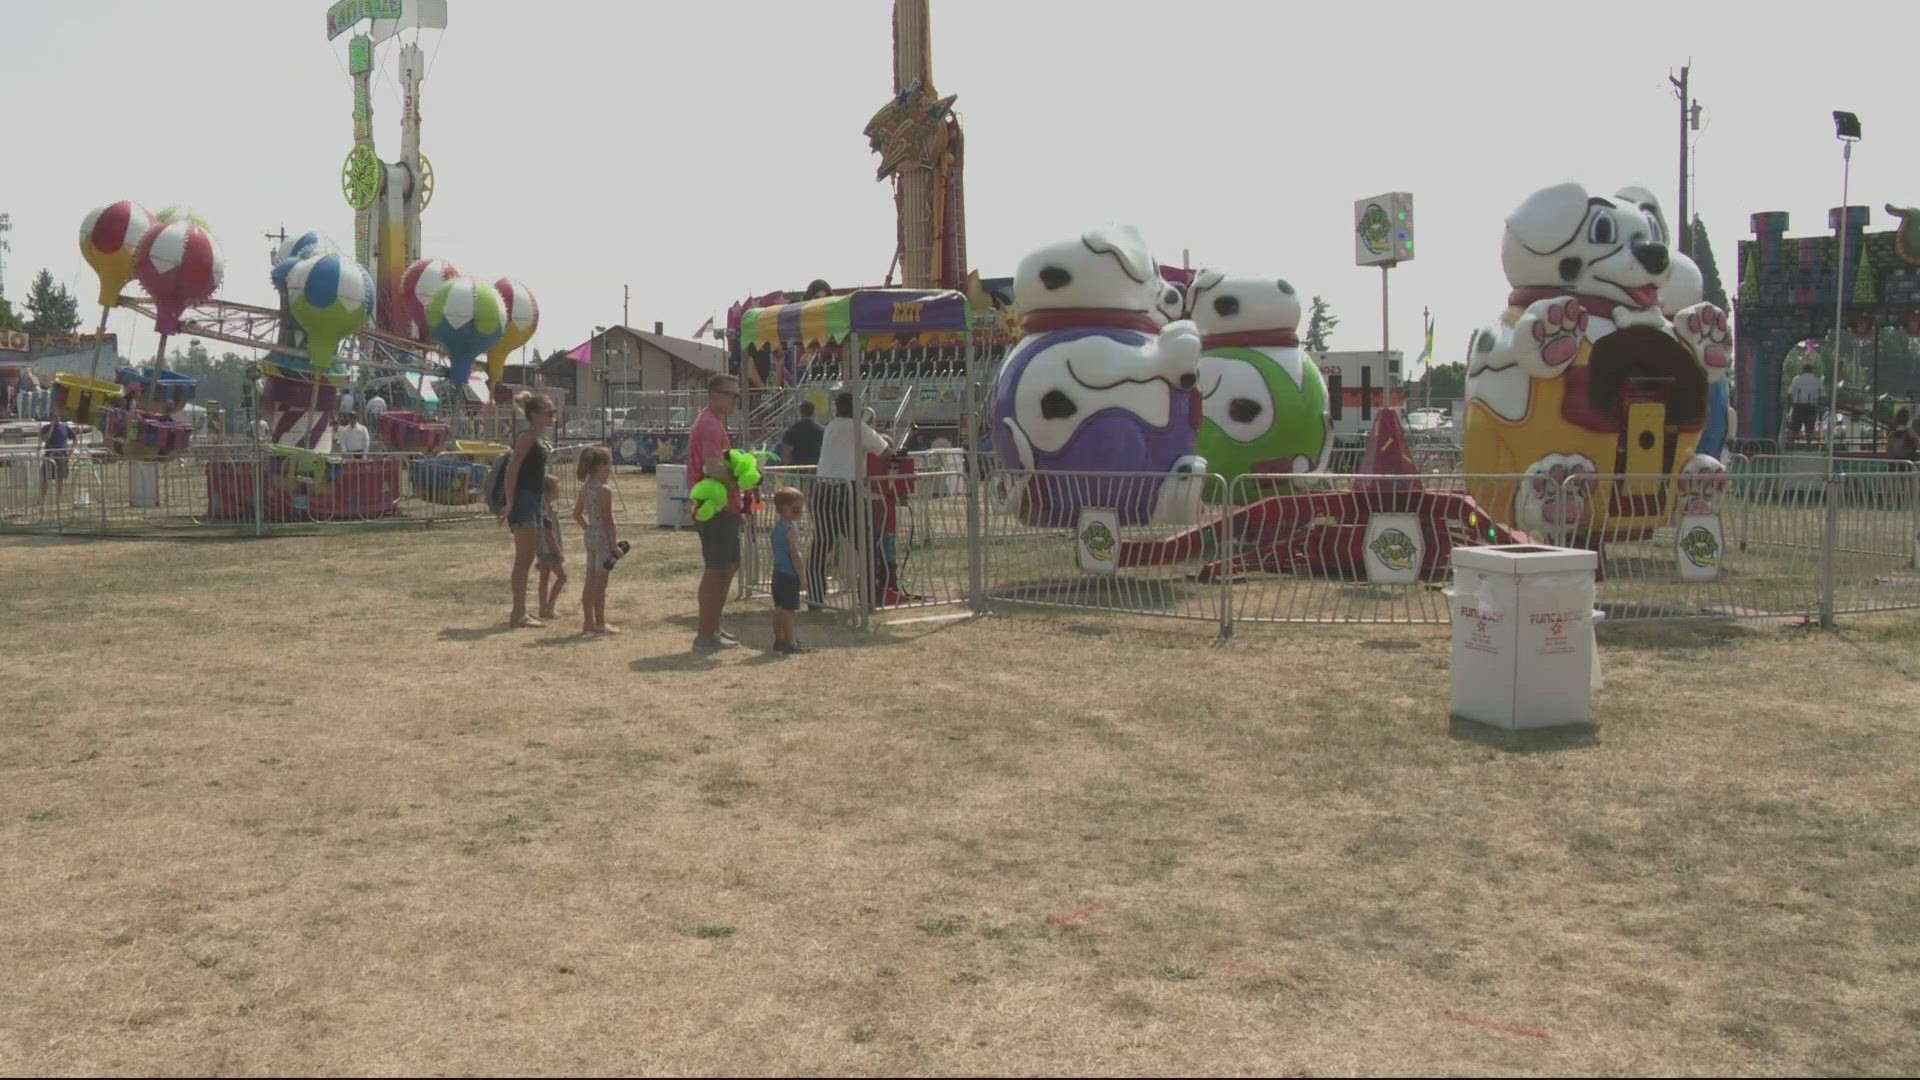 Heat and air quality are making spending any time outside tough throughout the region. Fair goers are getting into the fair and leaving before the heat is unbearable